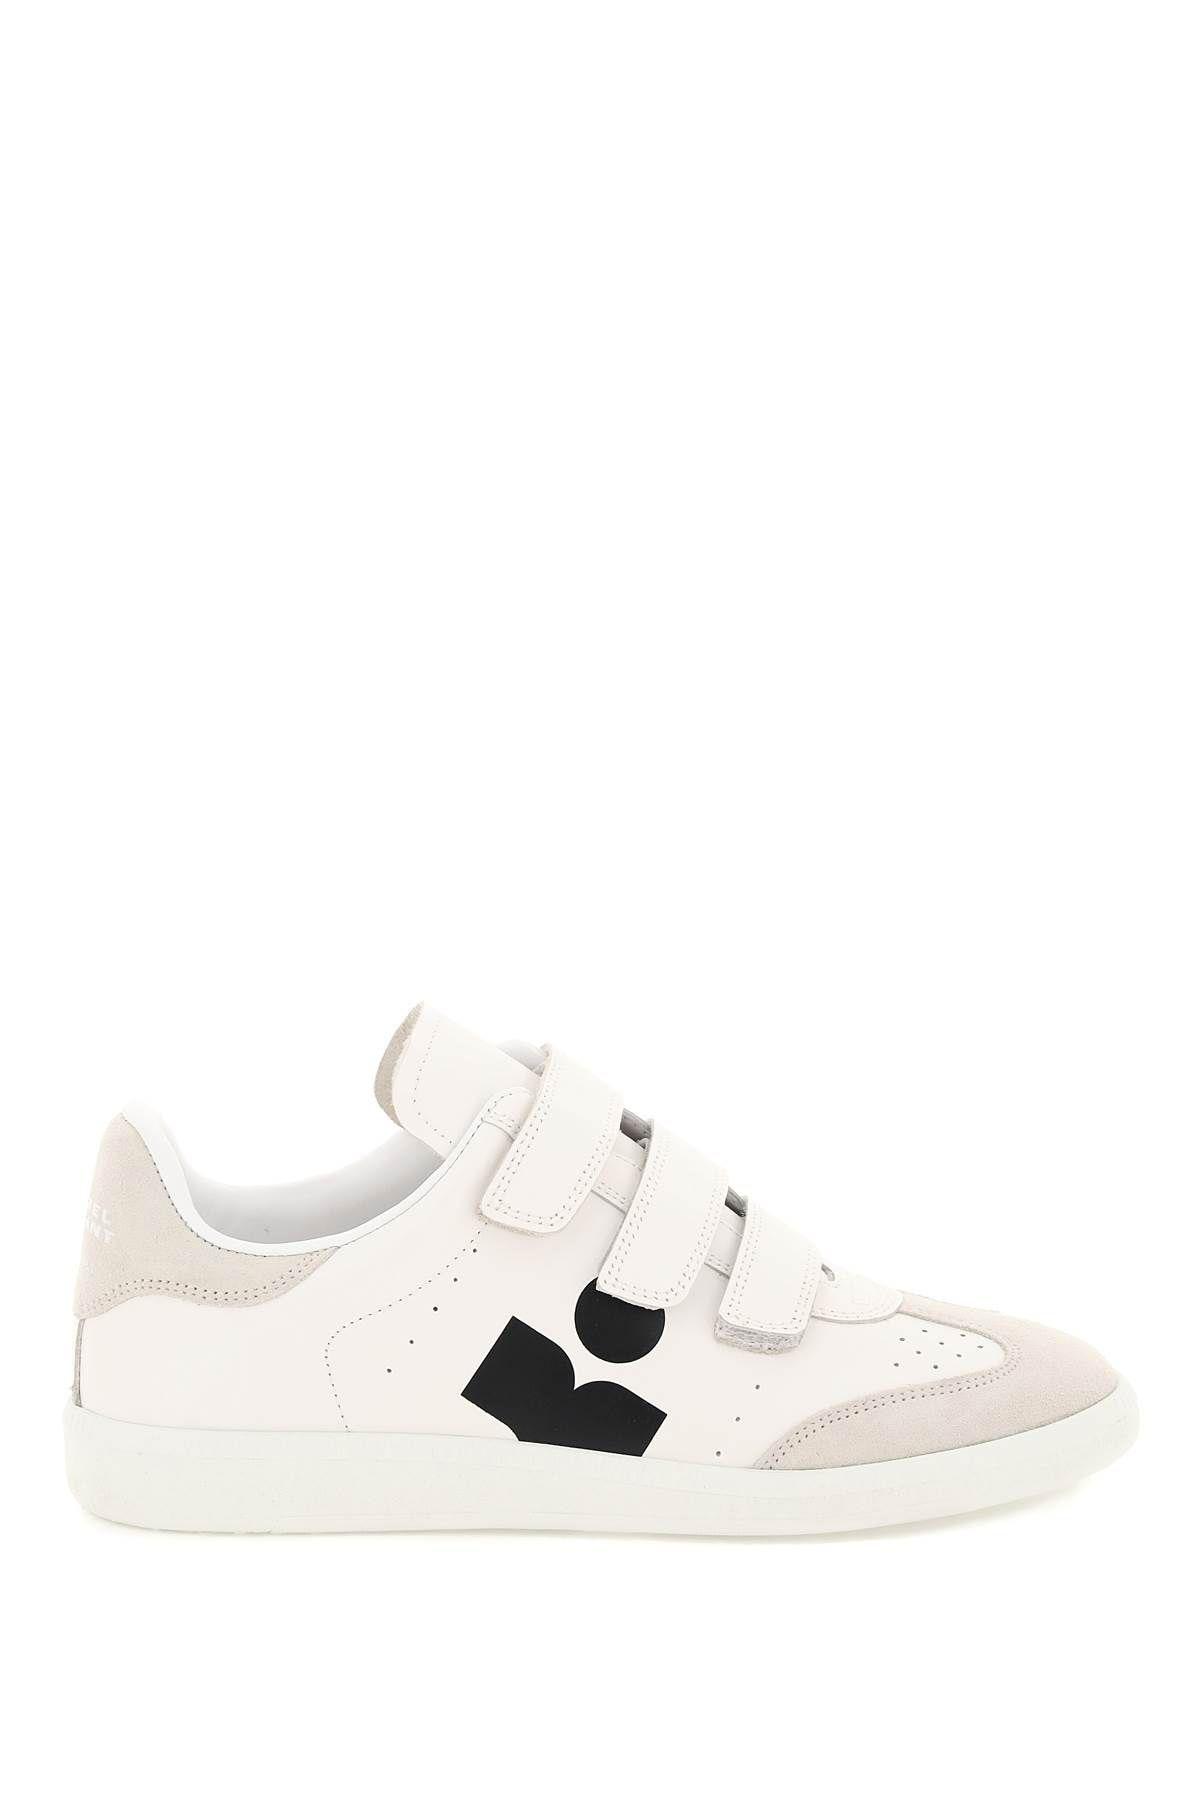 Isabel Marant Beth Leather Sneakers In Black | ModeSens